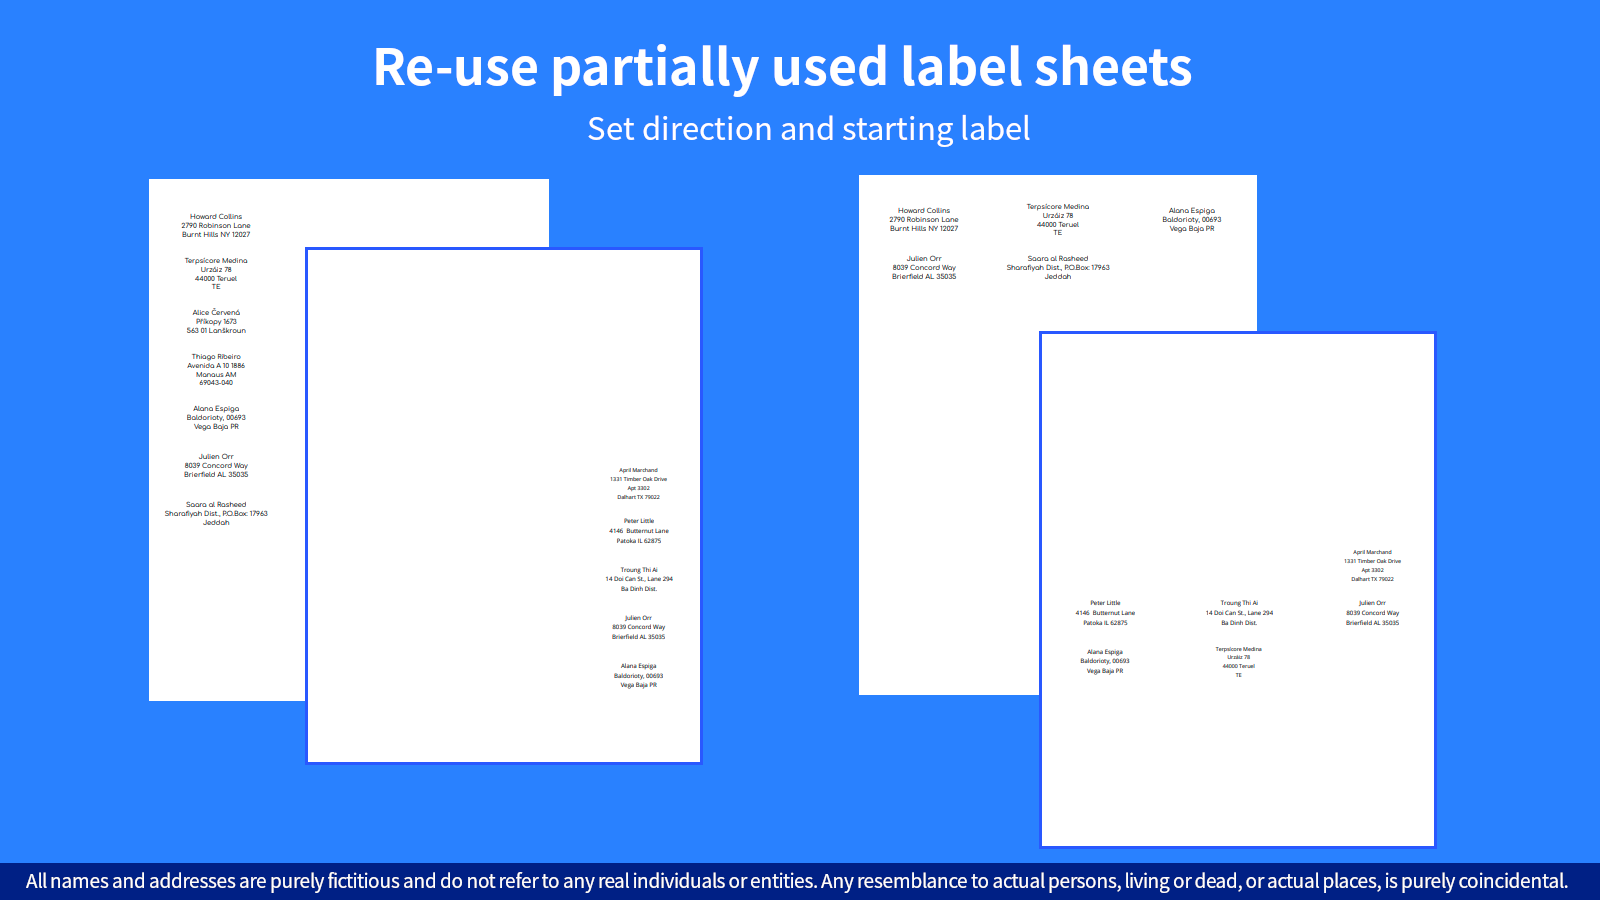 Re-use partially used label sheets